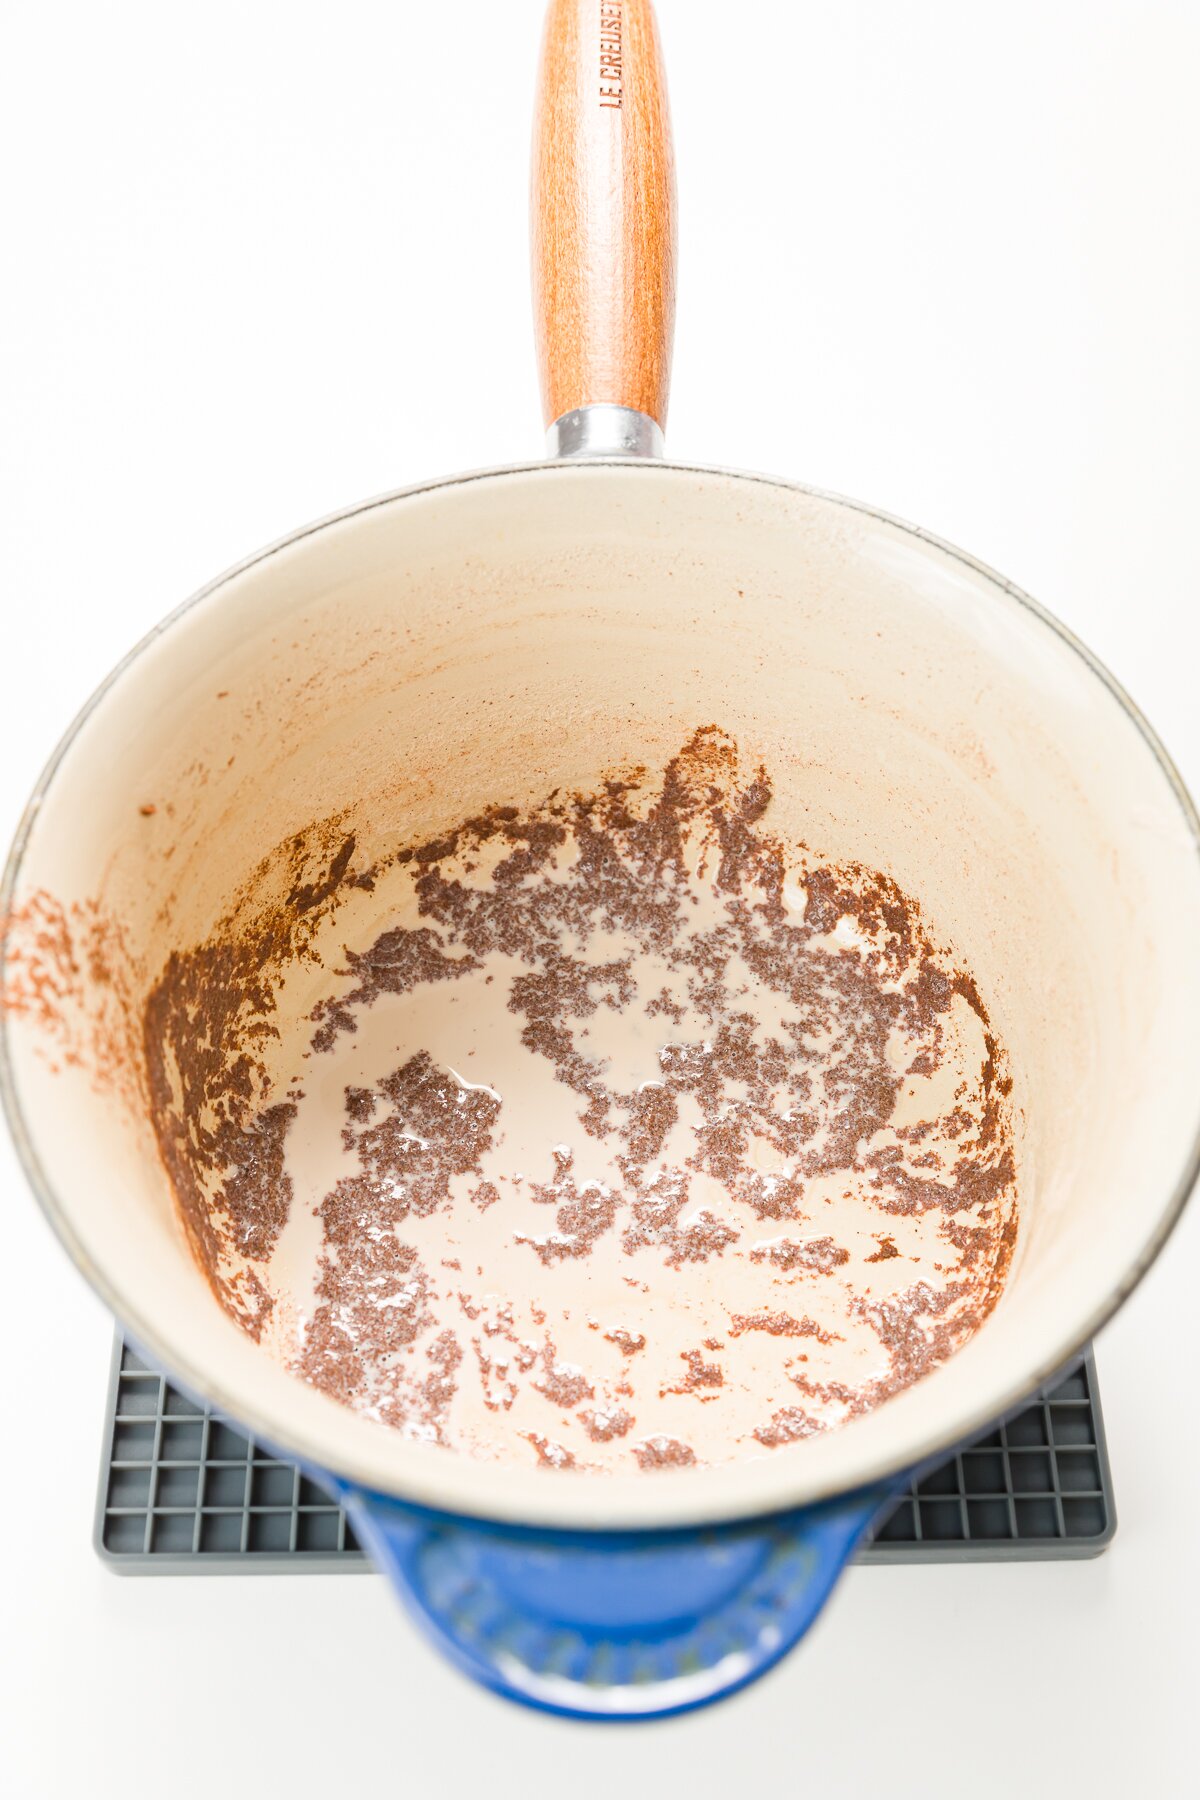 Looking down into a sauce pan with cinnamon sludge on the bottom of it